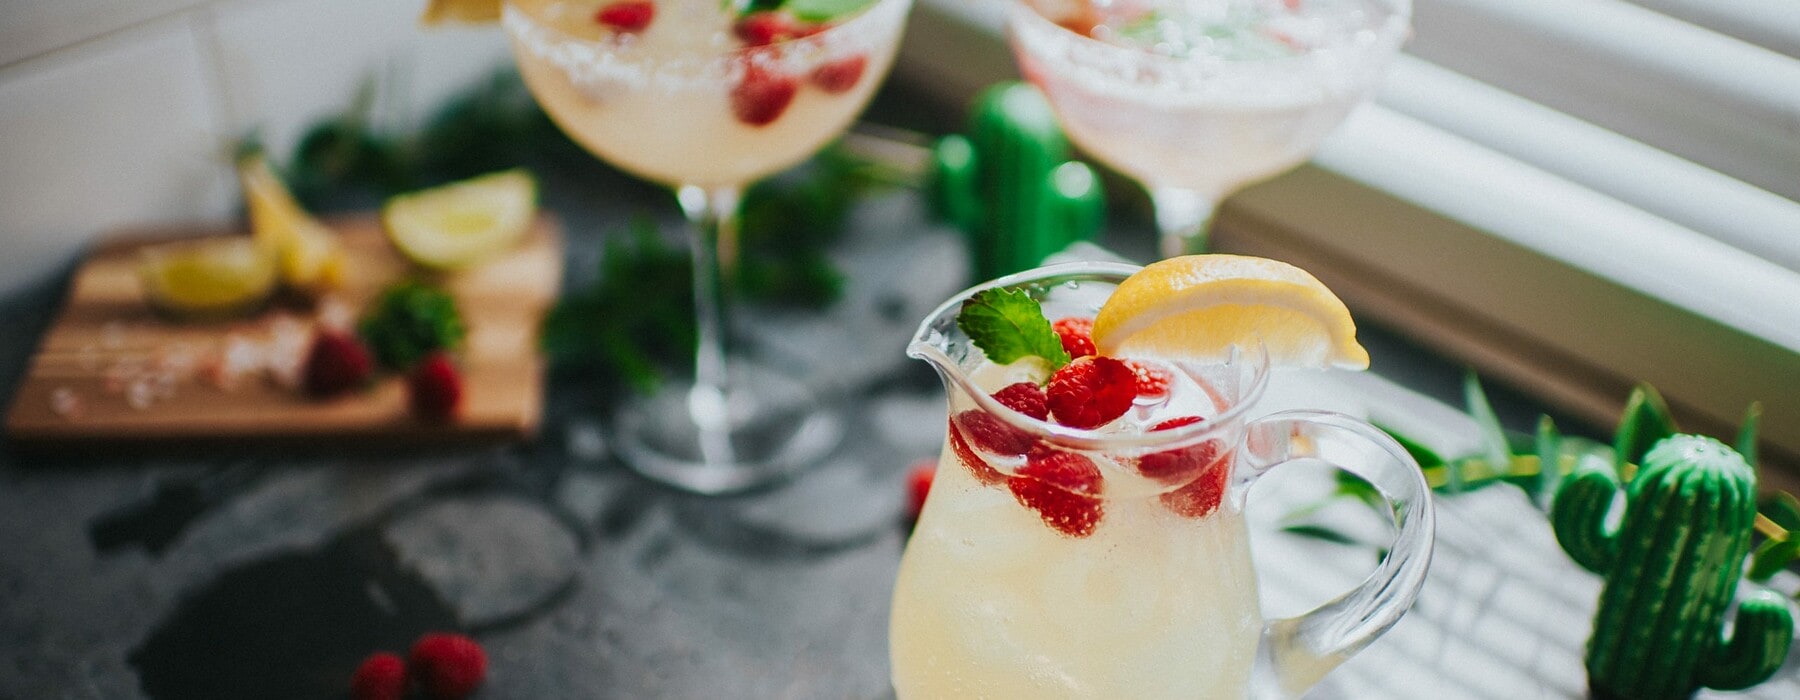 Stylishly presented margherita cocktails, in a kitchen environment with a jug, and dressed with fruit.